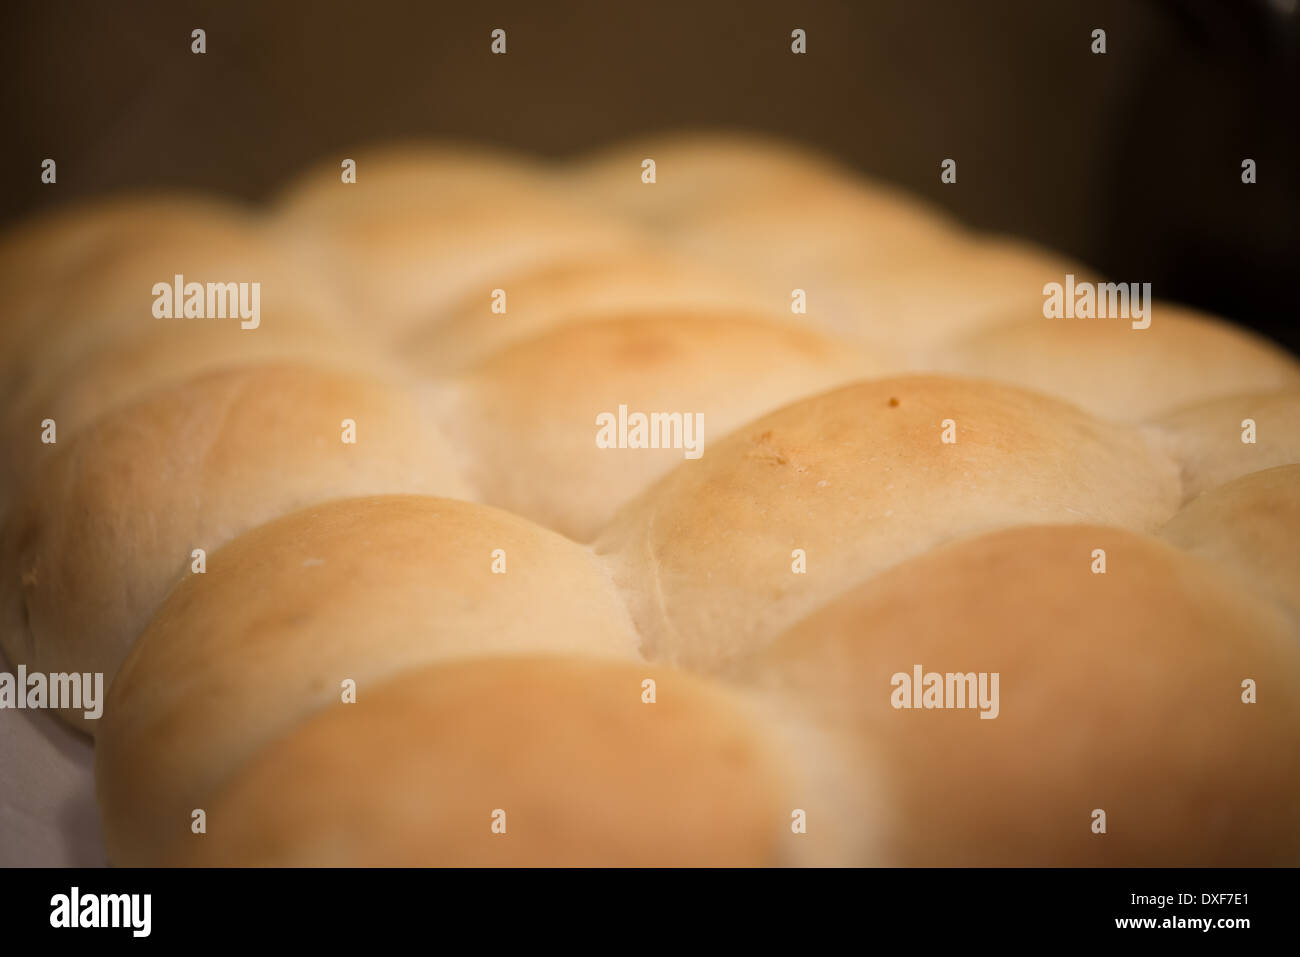 Parker House Rolls on a baking sheet with a shallow depth of field Stock Photo